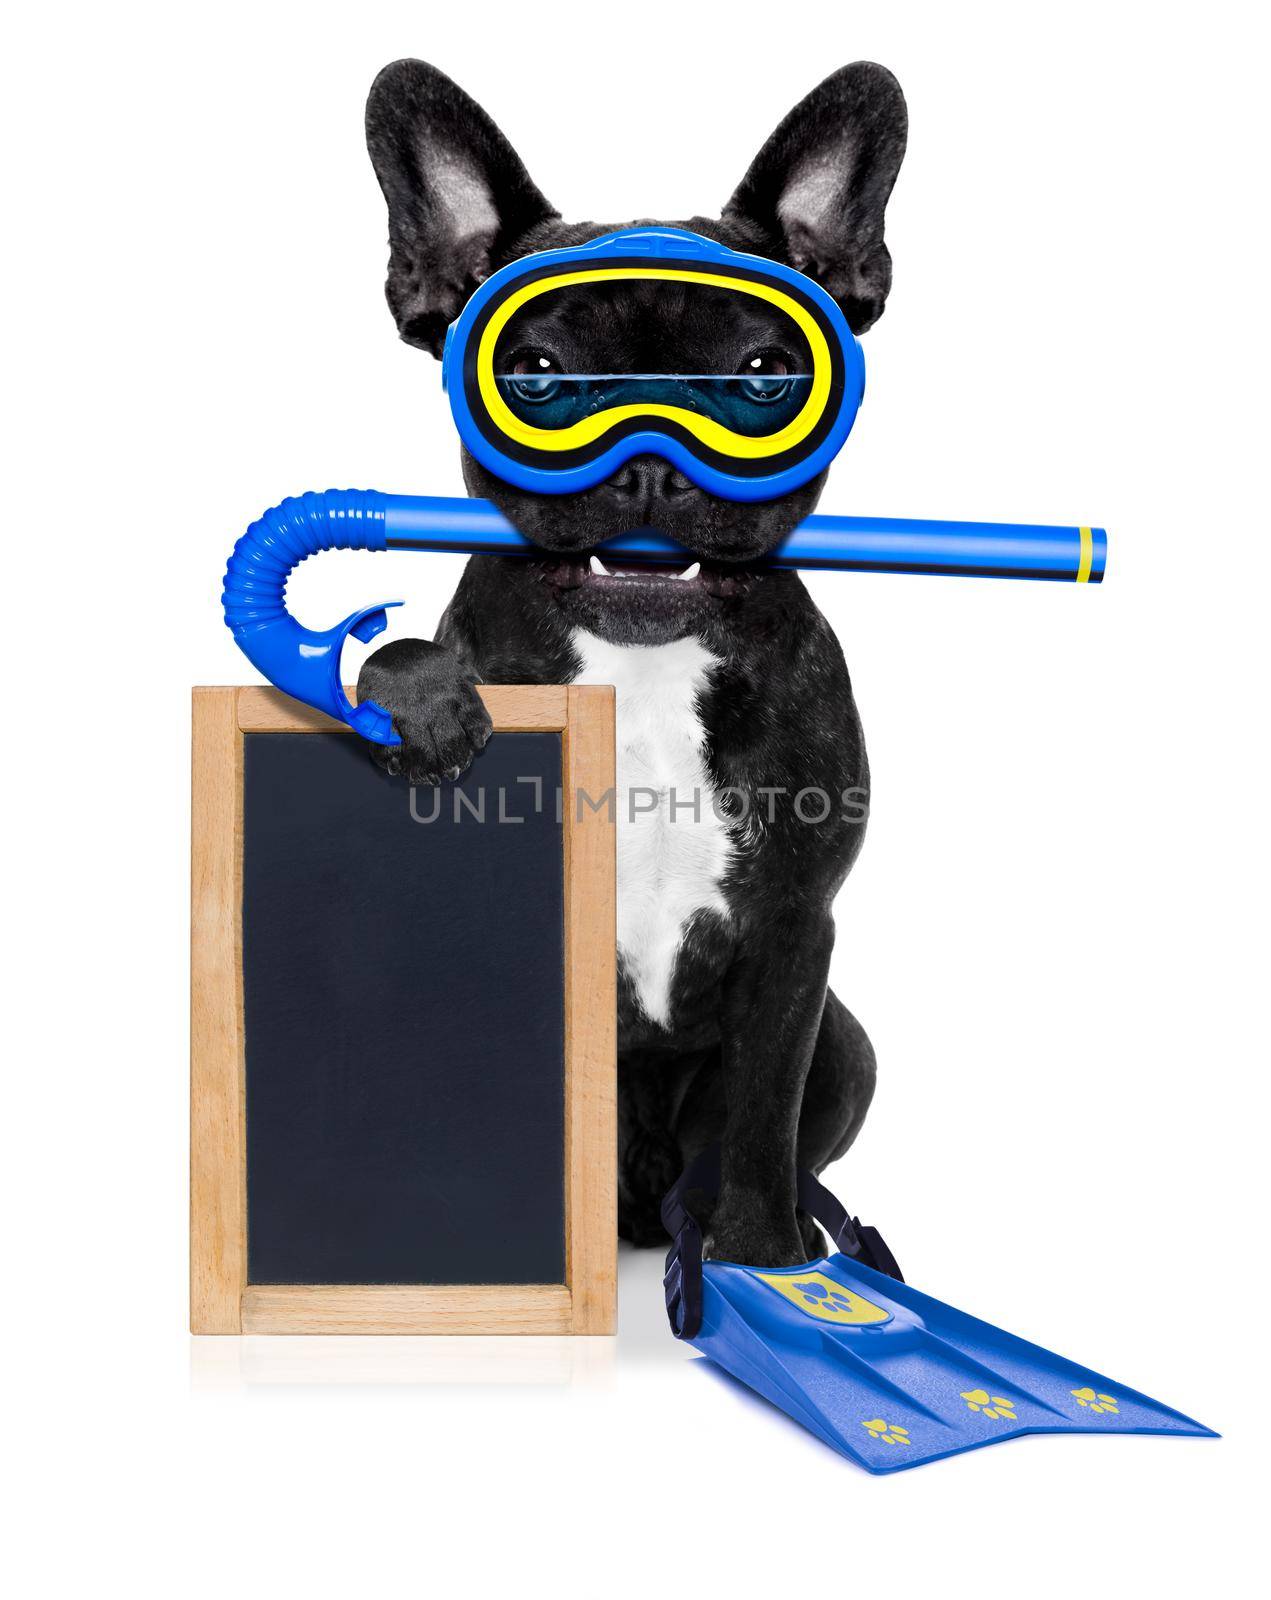 snorkeling scuba diving french bulldog dog  with mask and fins , holding  blank blackboard or placard,  isolated on white background